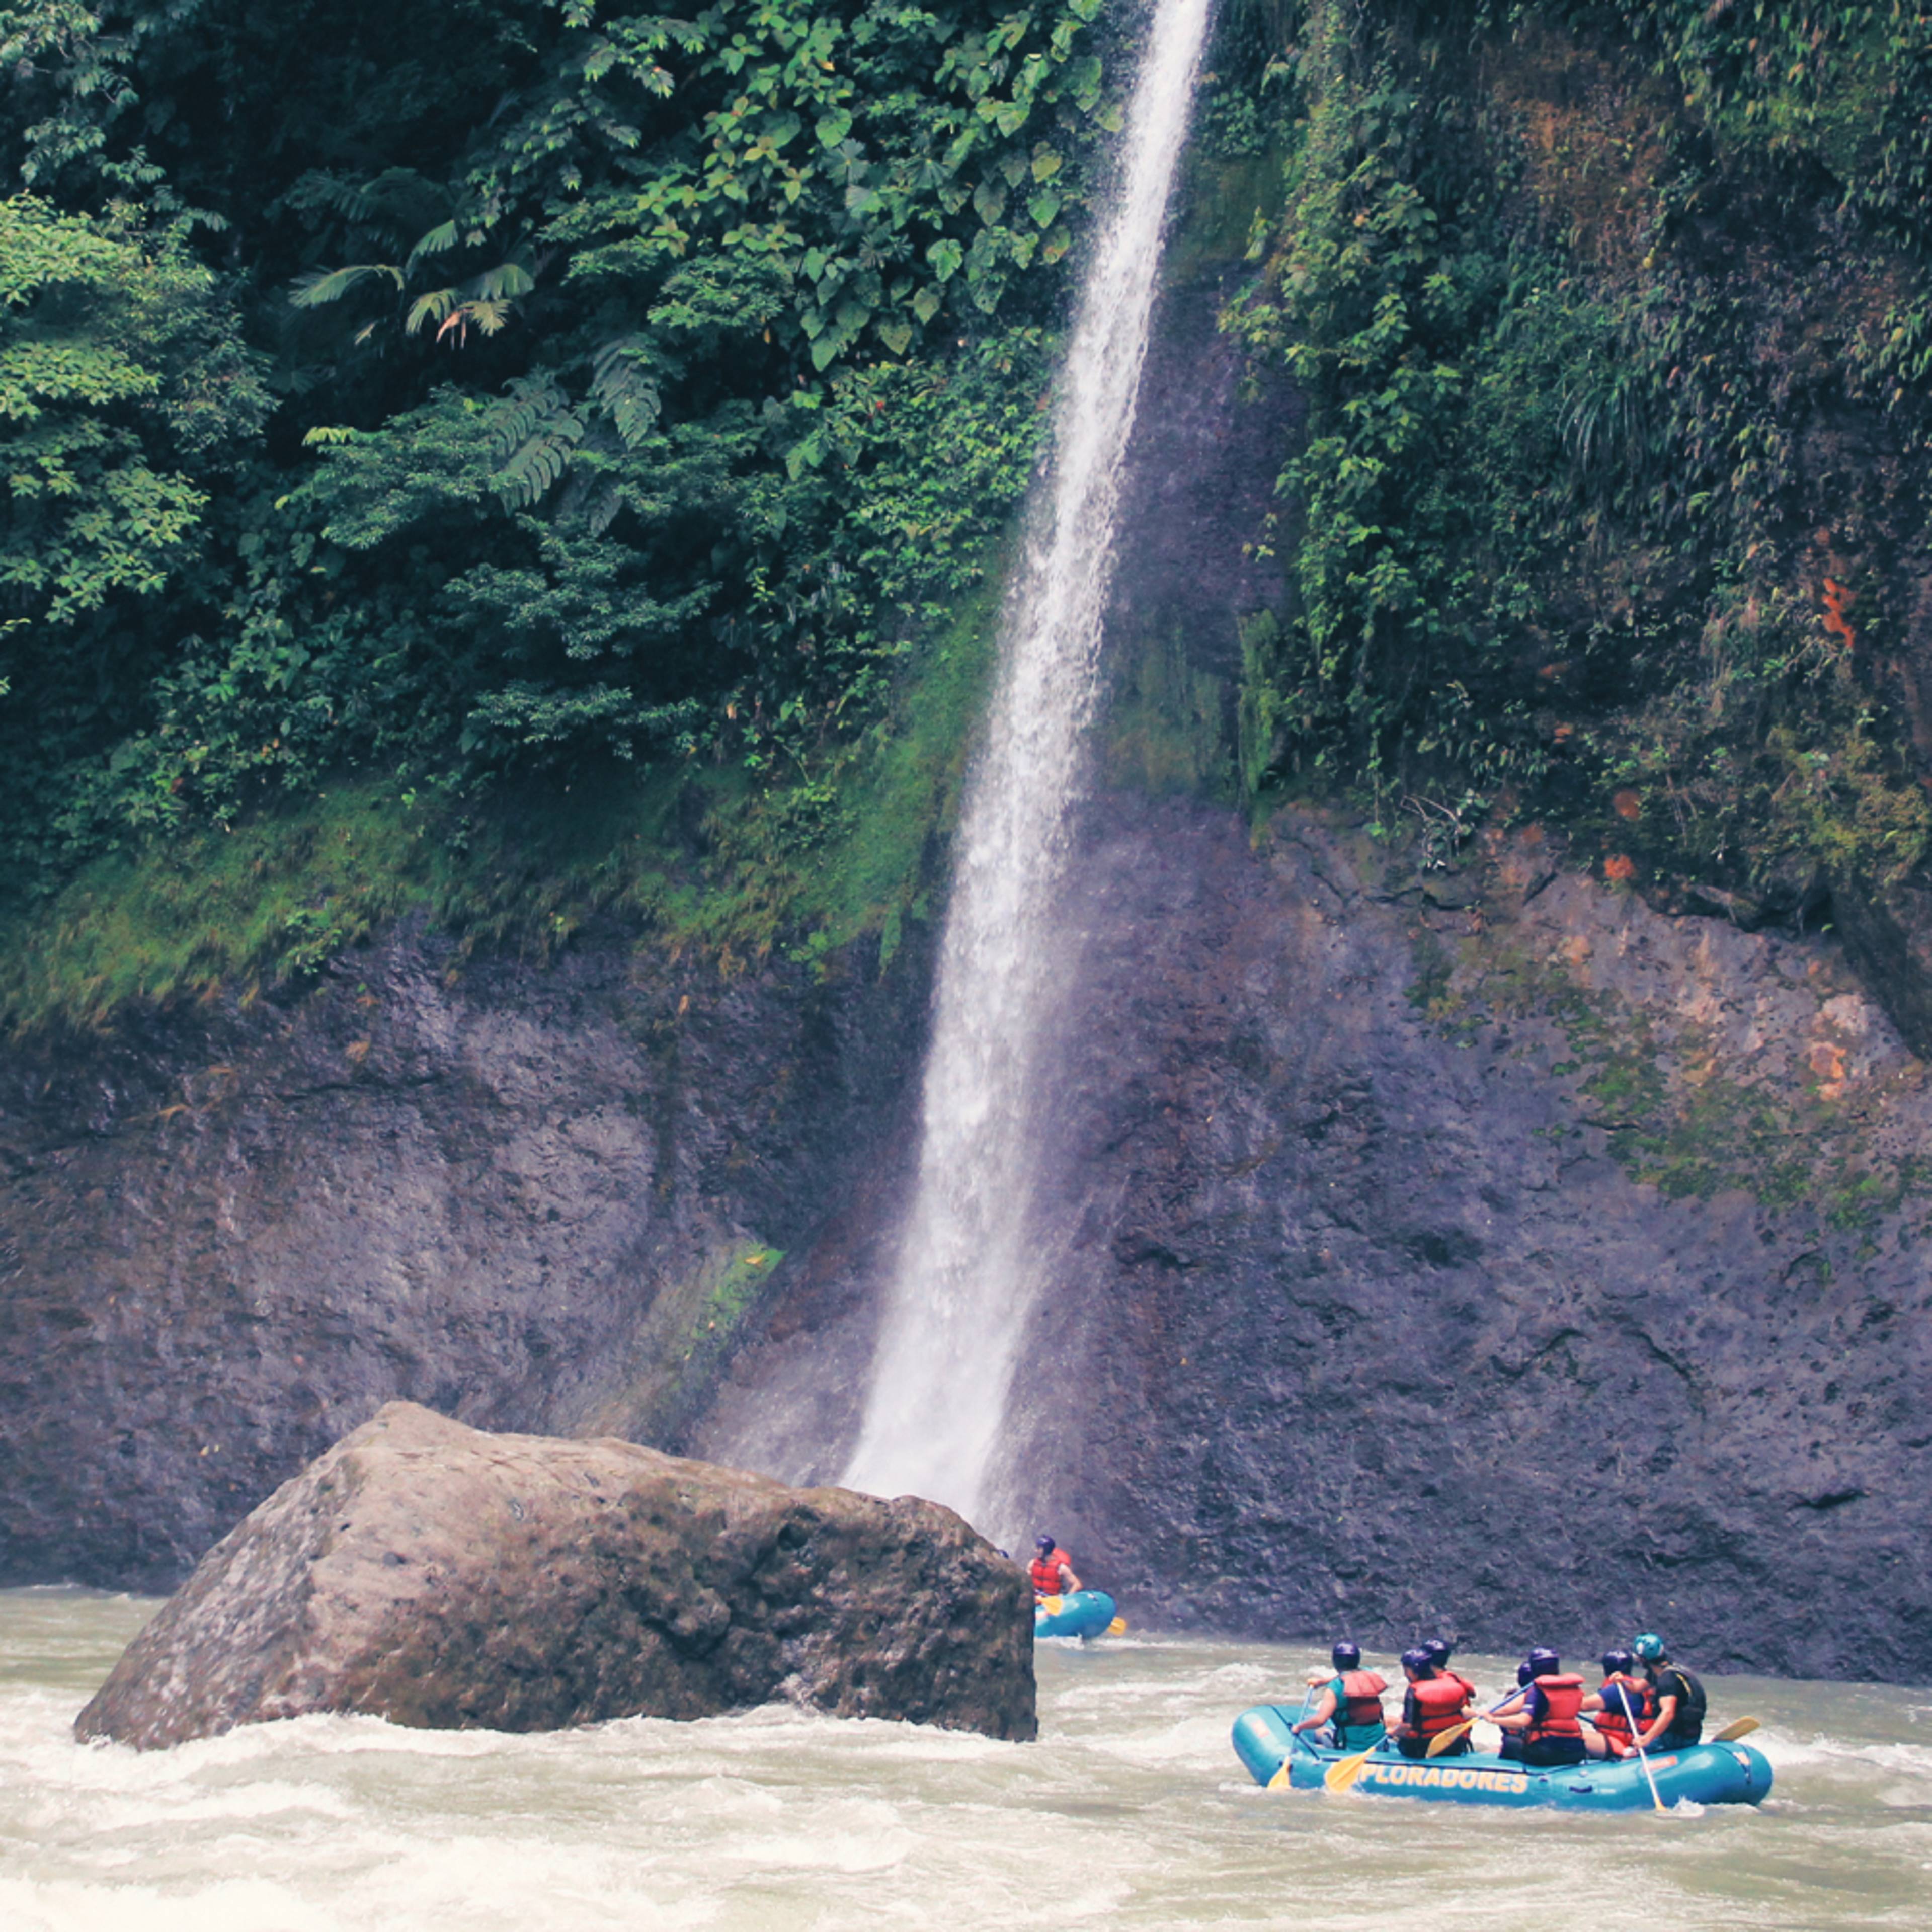 Design your perfect adventure trip with a local expert in Costa Rica